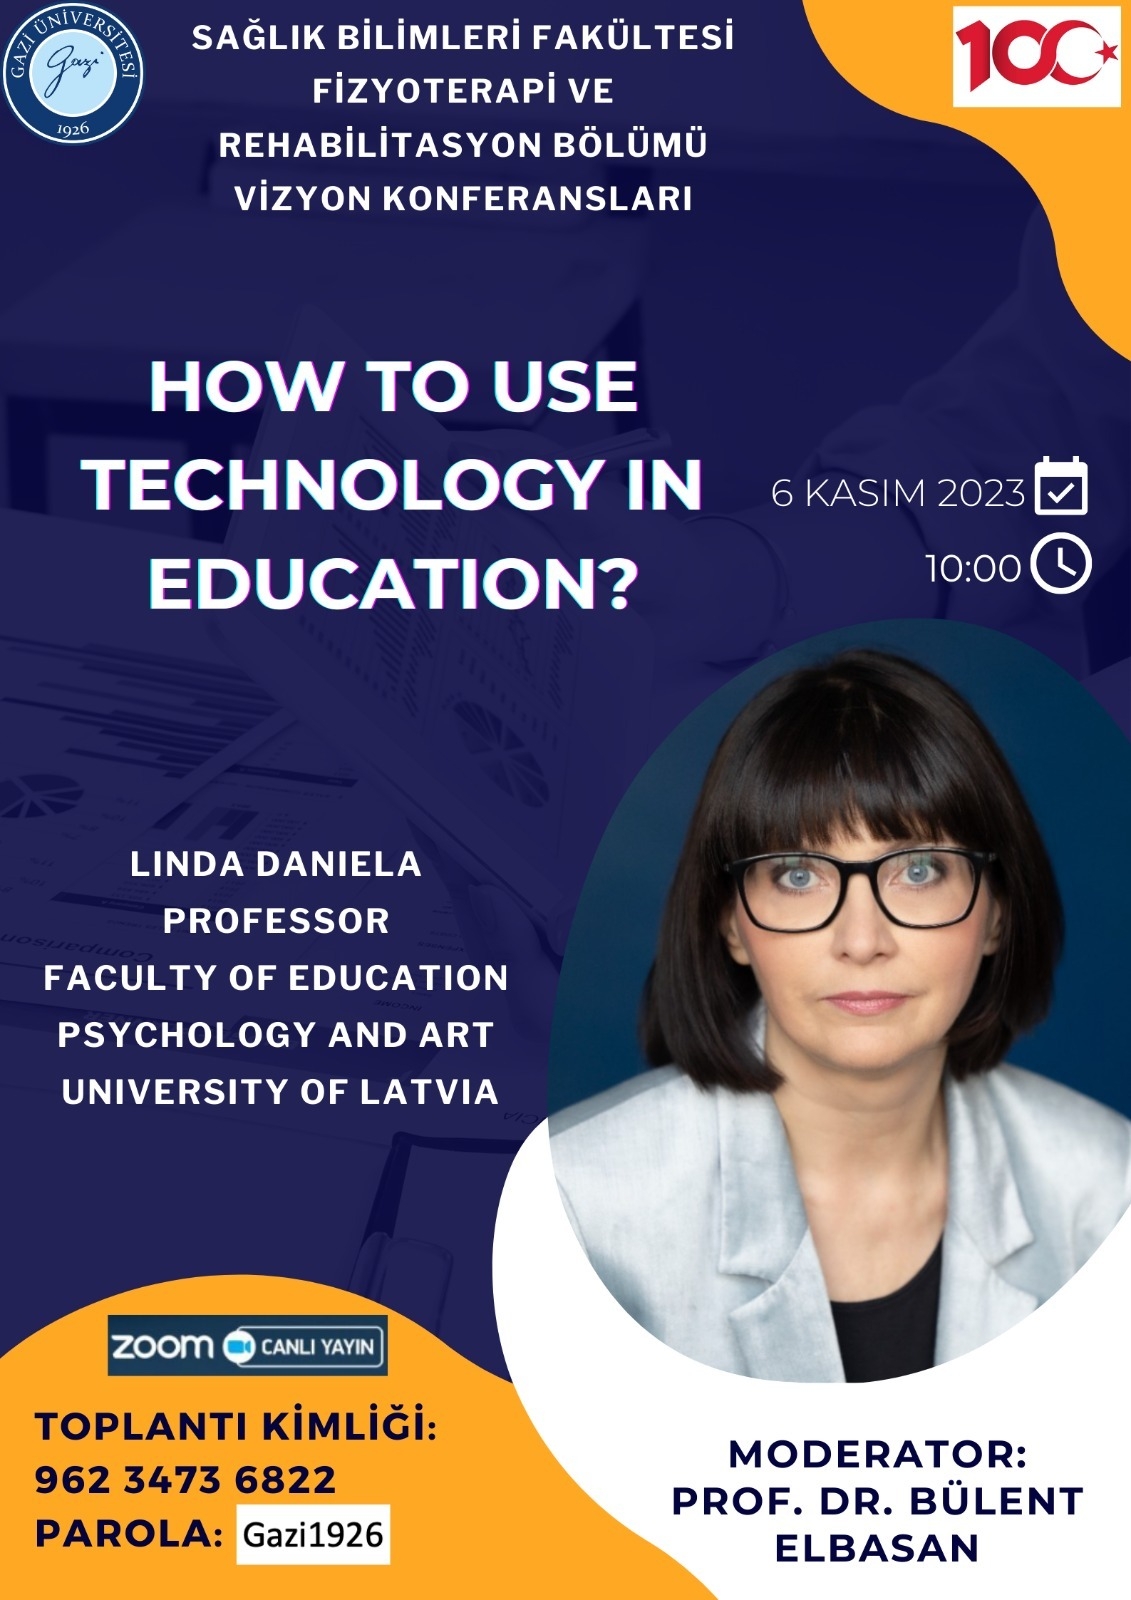 HOW TO USE TECHNOLOGY IN EDUCATION?